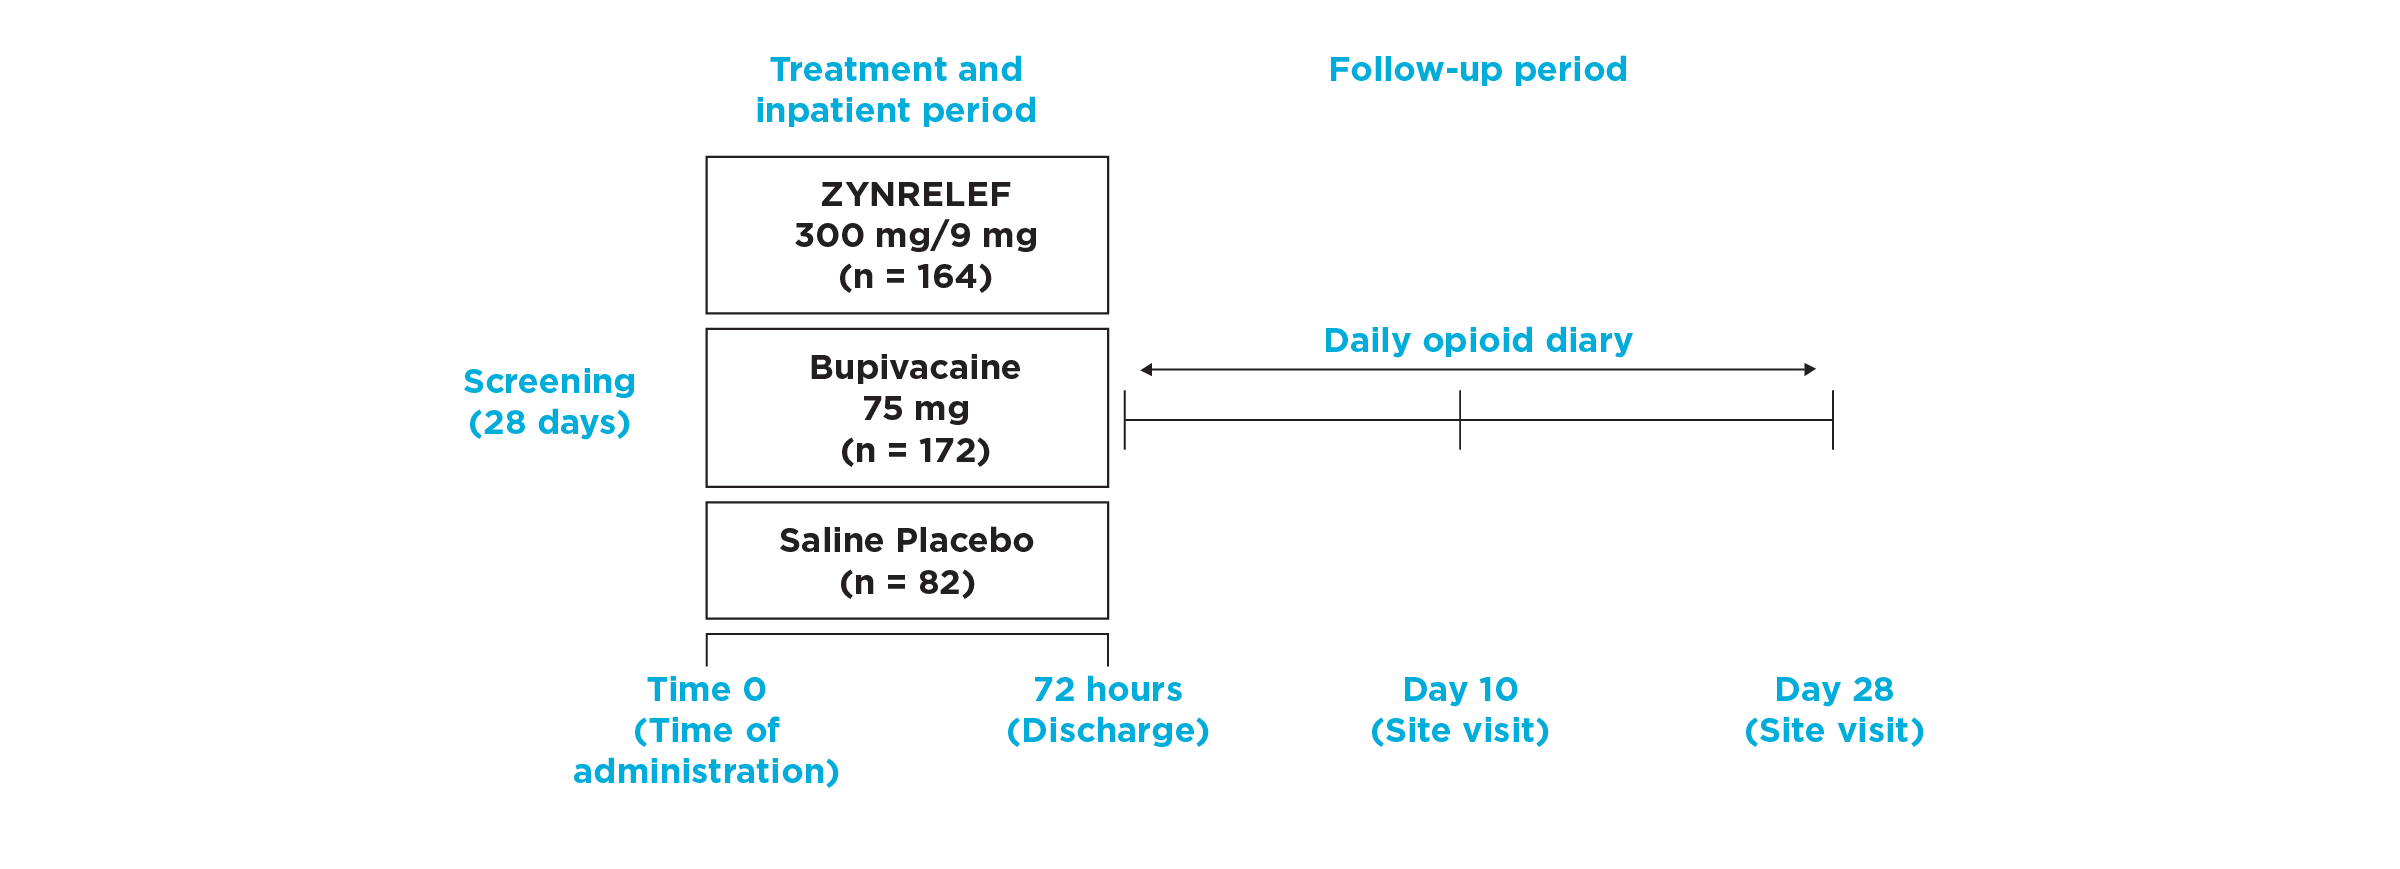 Timeline overview of EPOCH 2 Herniorrhaphy study design from screening through follow up.